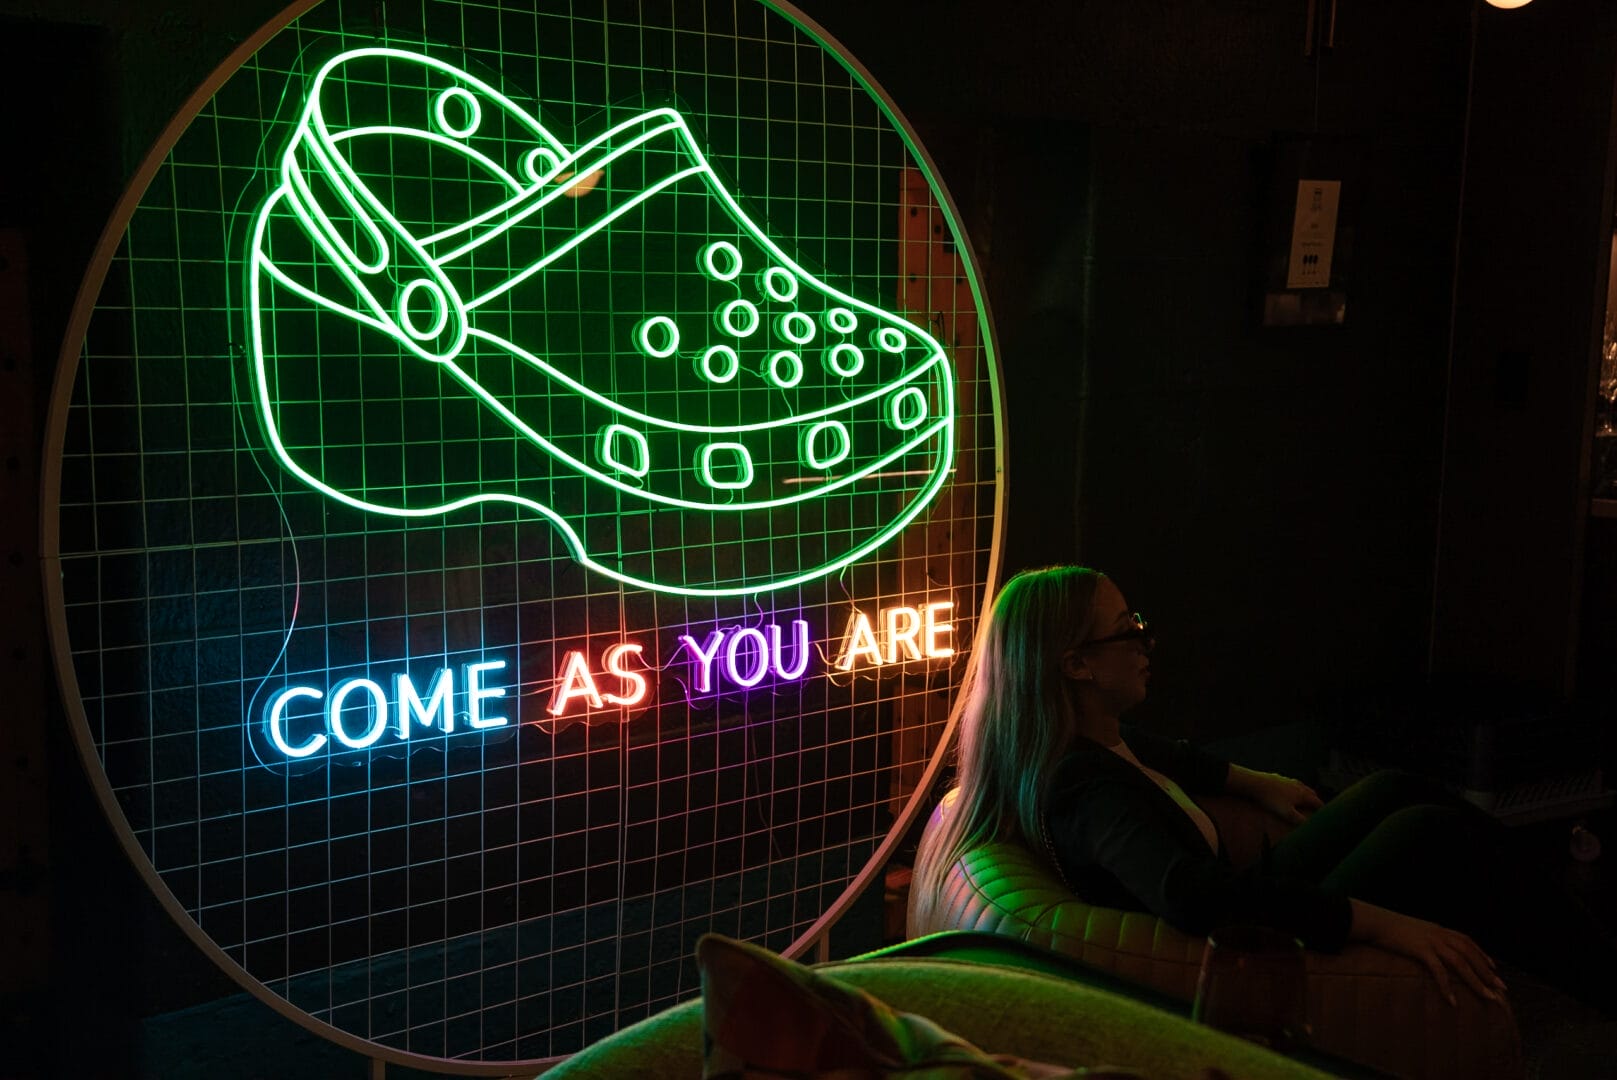 Crocs COME AS YOU ARE neon sign